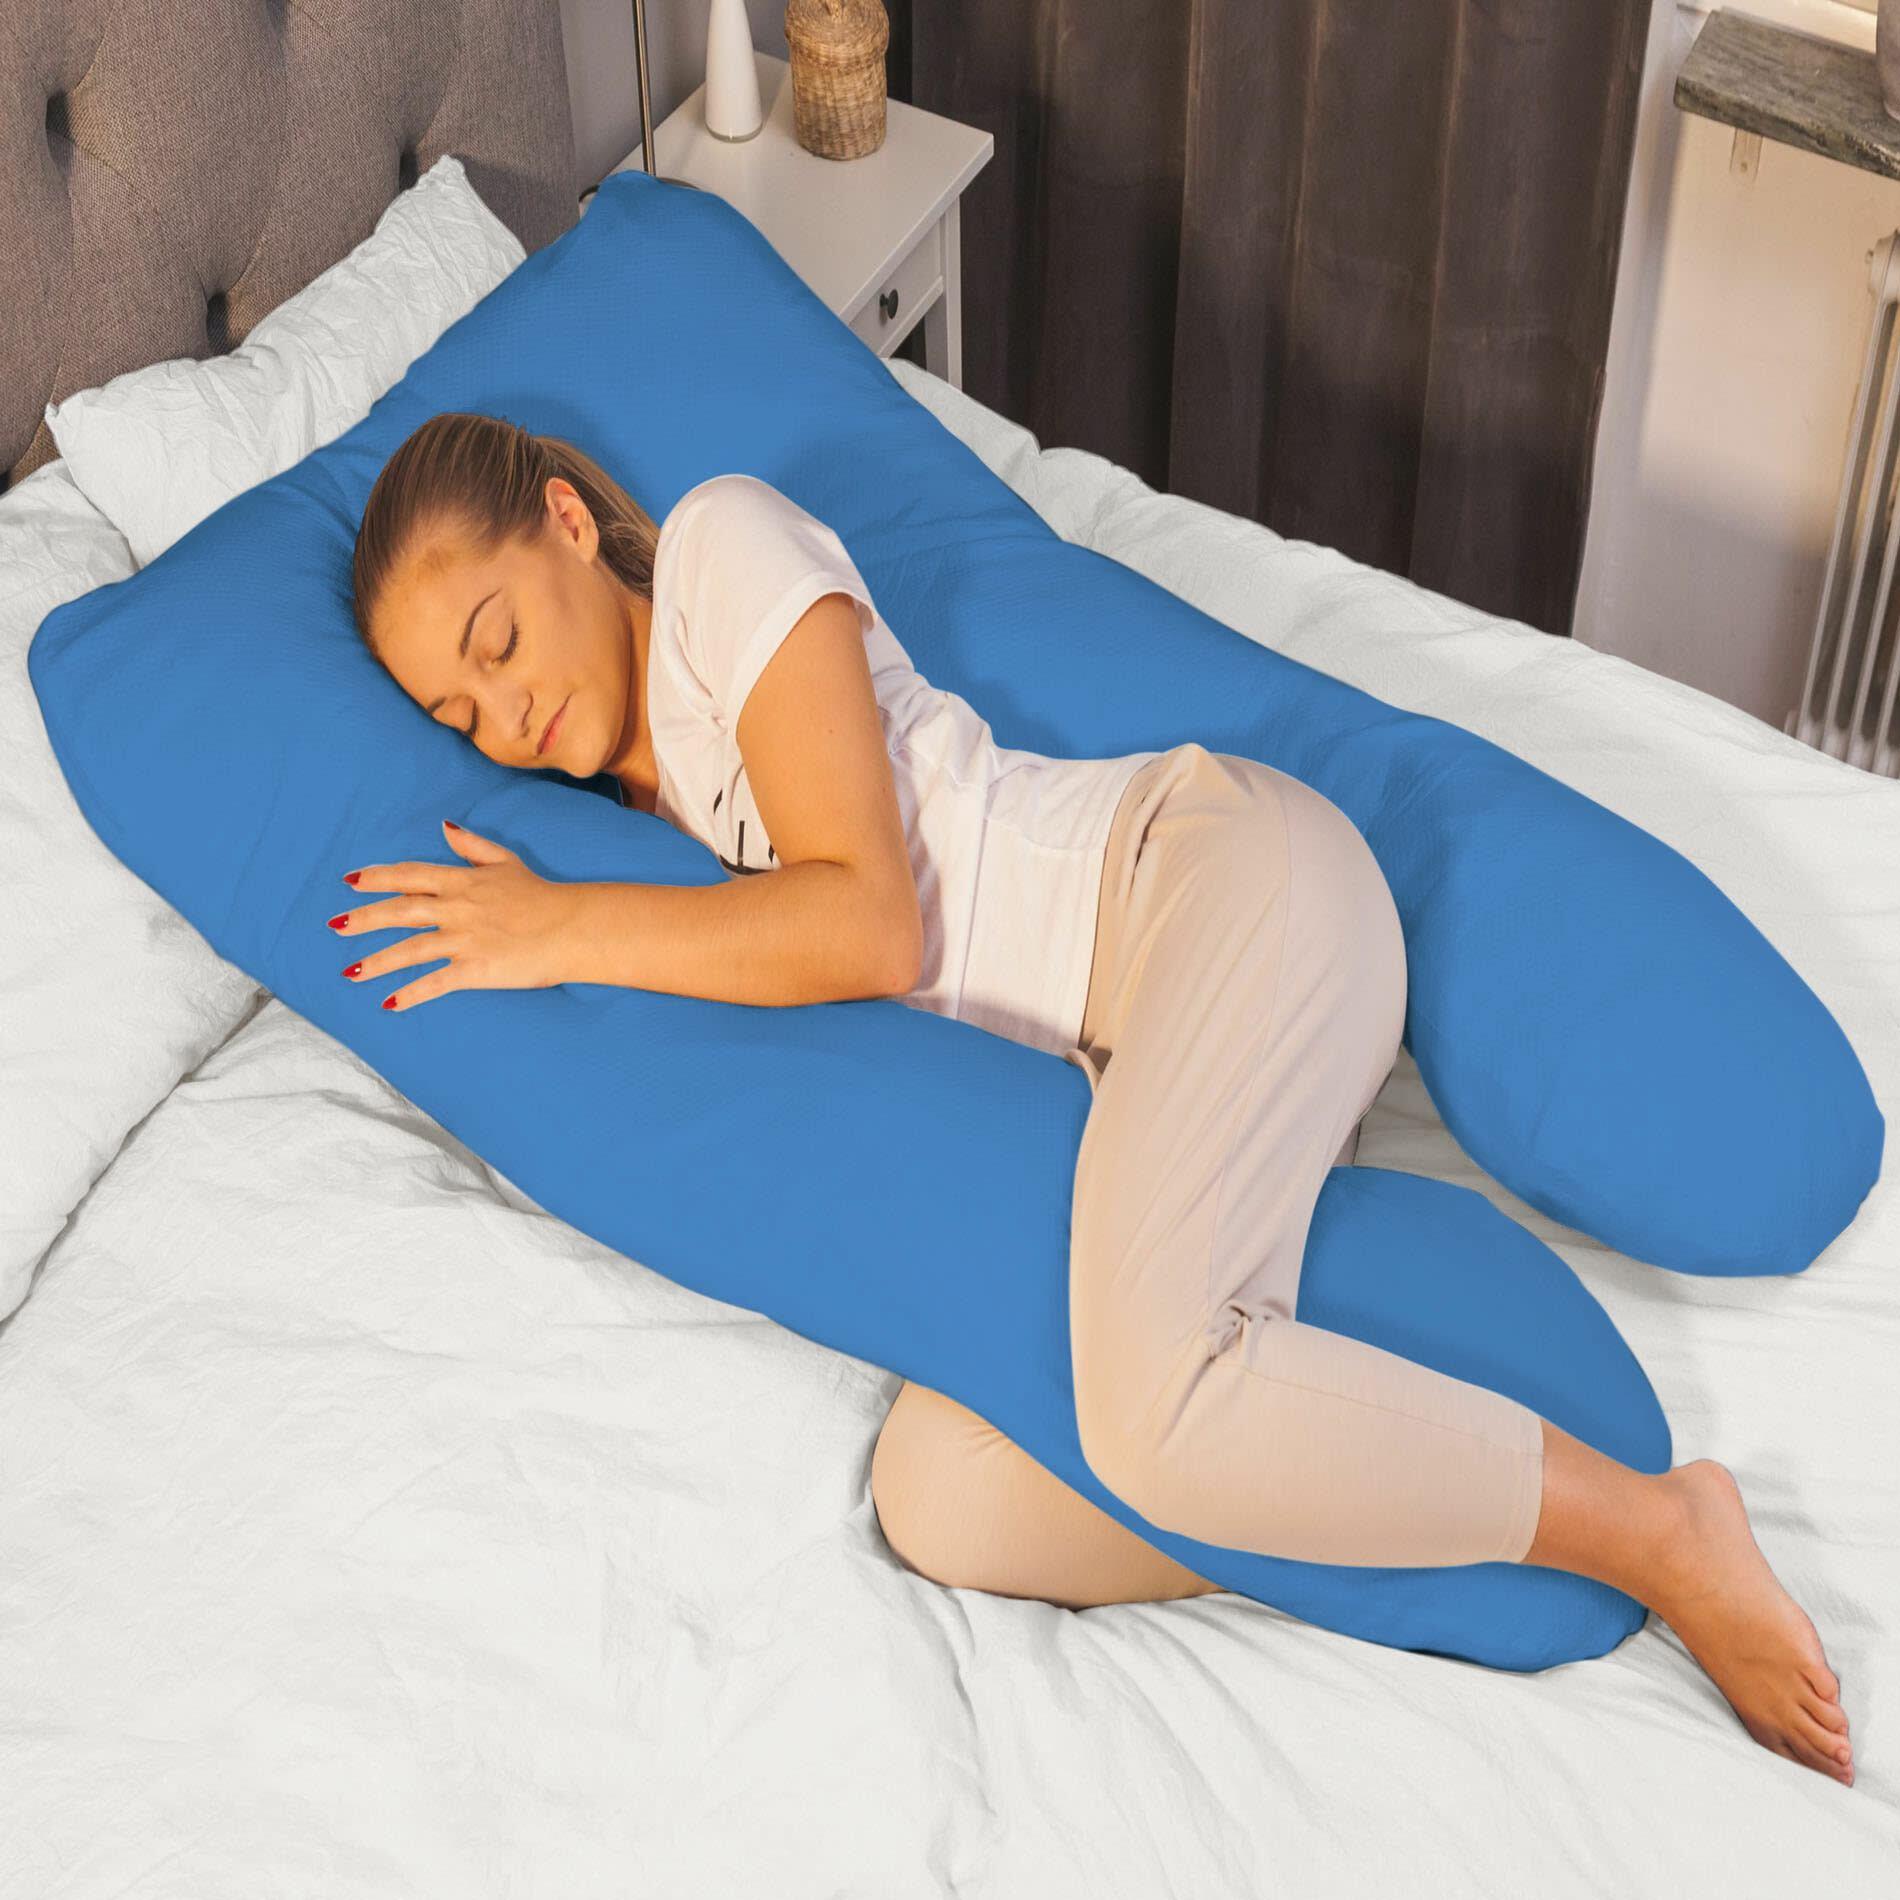 View Pregnancy Body Pillow Maternity Pillows for Sleeping 9FT Blue information